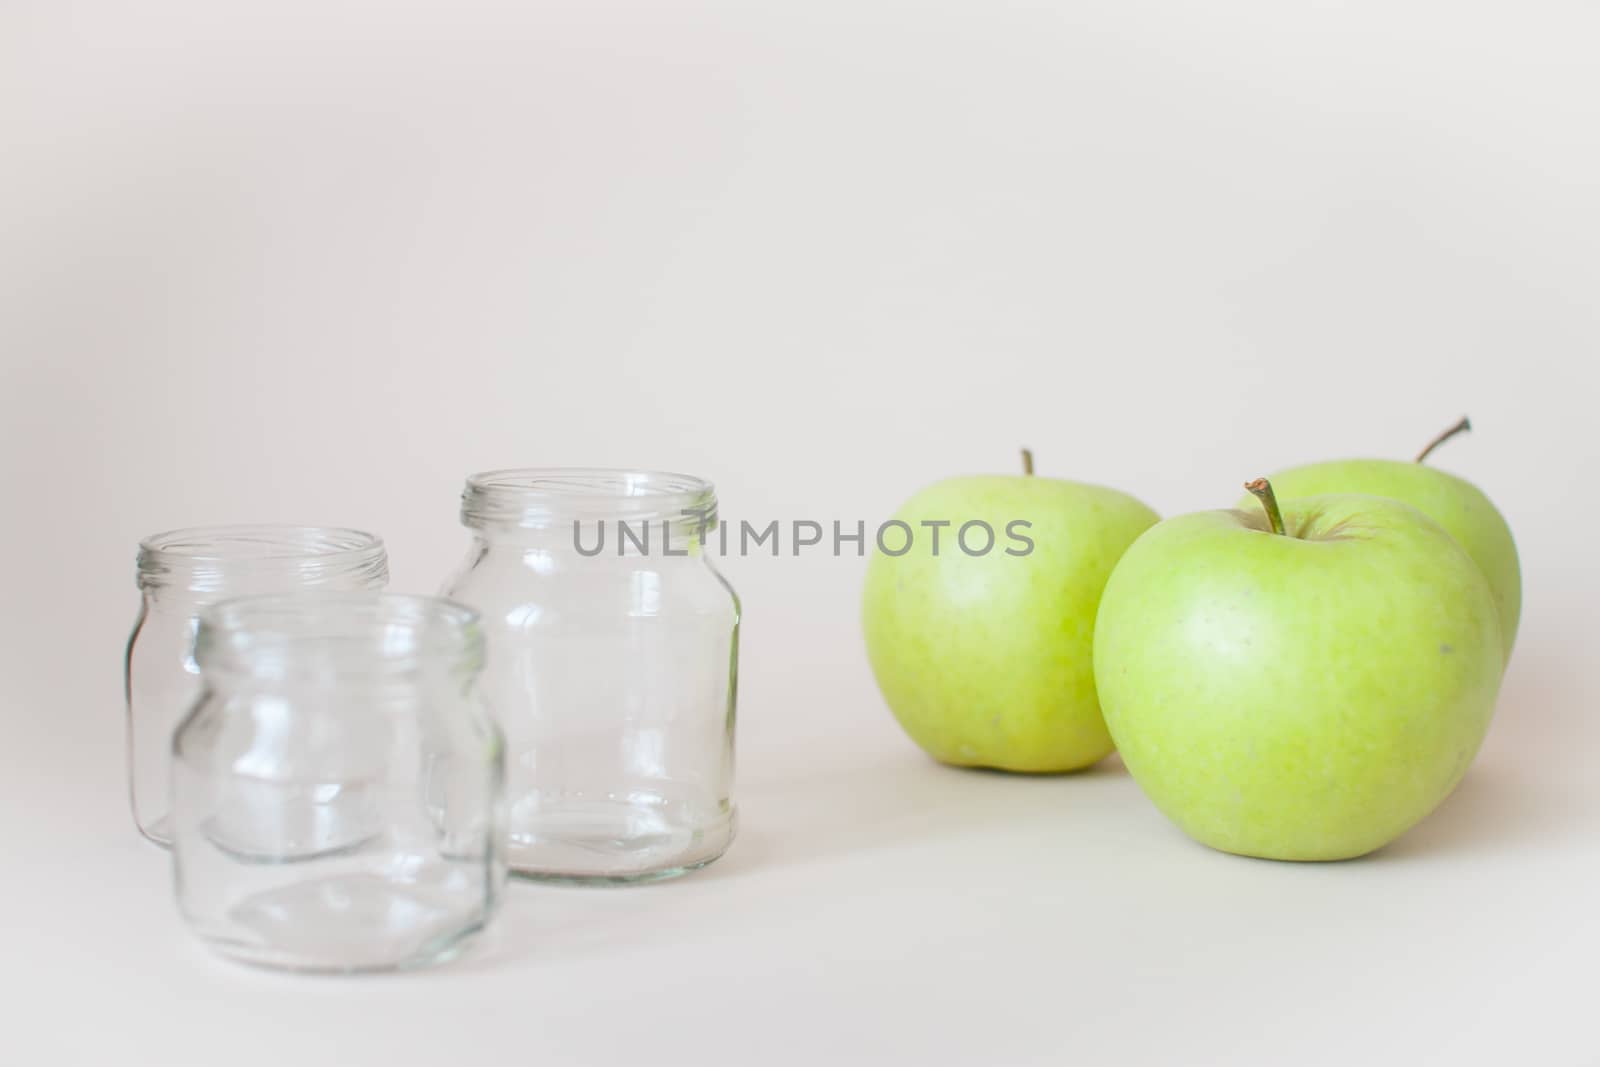 Green ripe apples and empty transparent jars for baby food on a light background